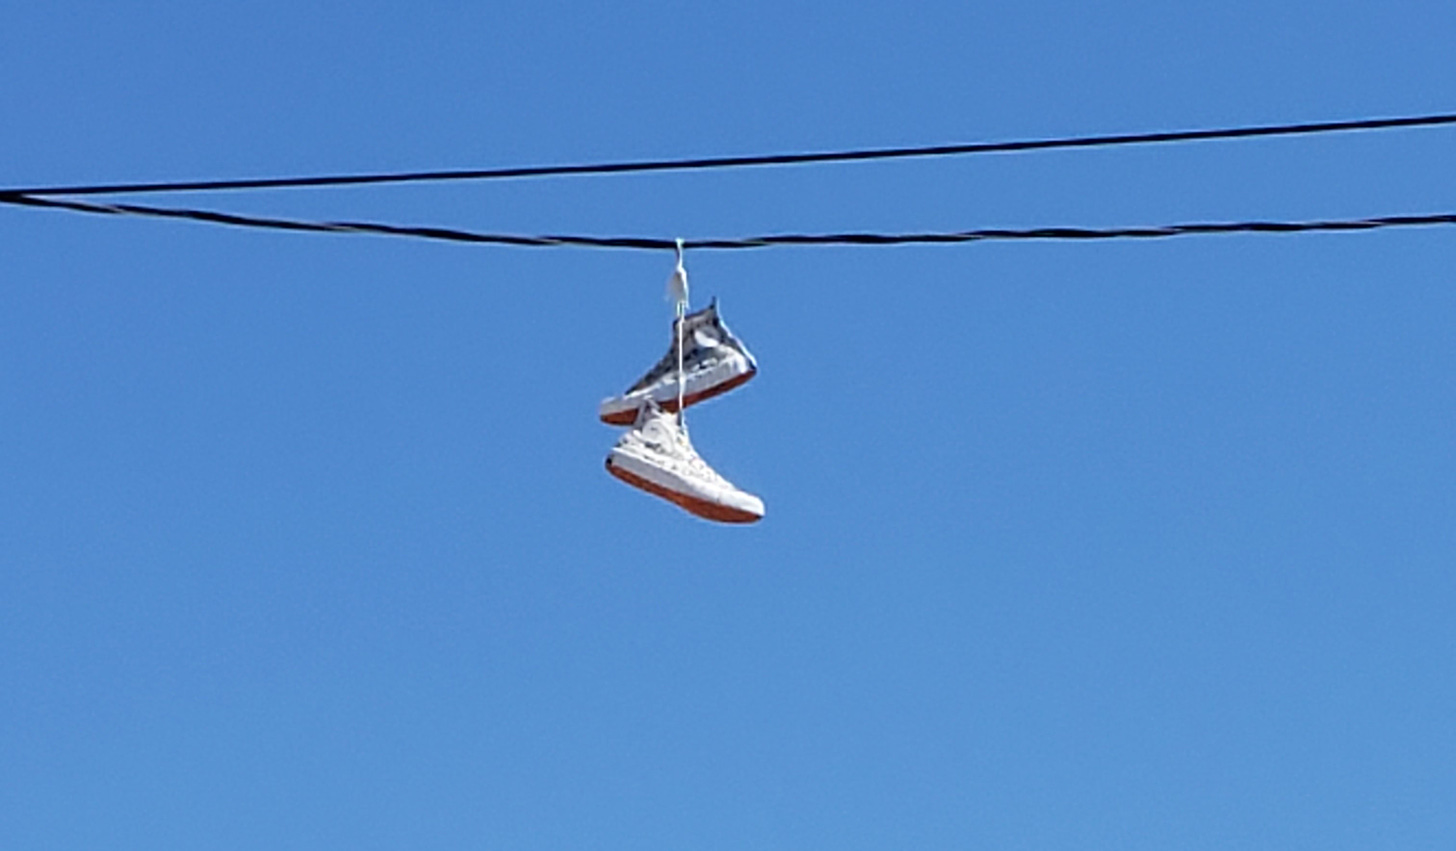 A pair of Converse sneakers hanging from electricity wires.